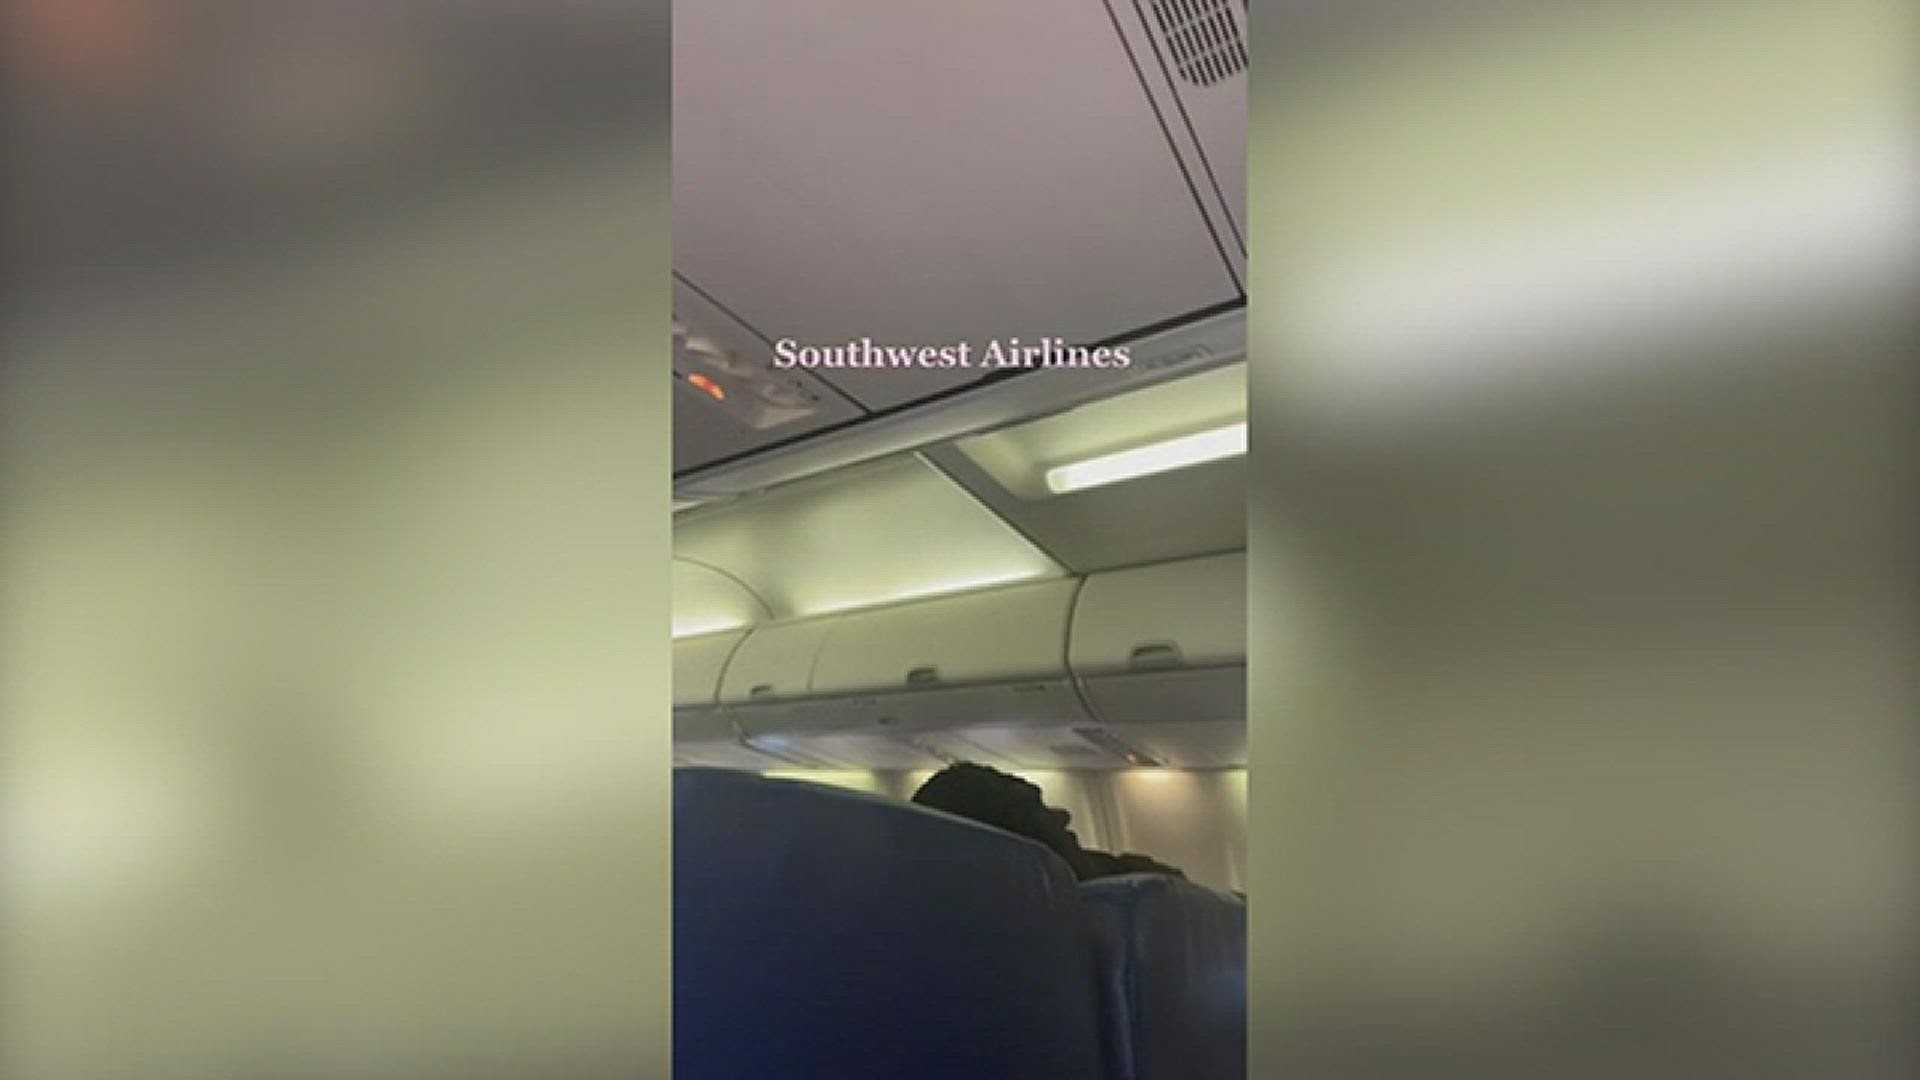 A nude photograph nearly delayed a southwest airlines flight last week, CNN Newsource reports.